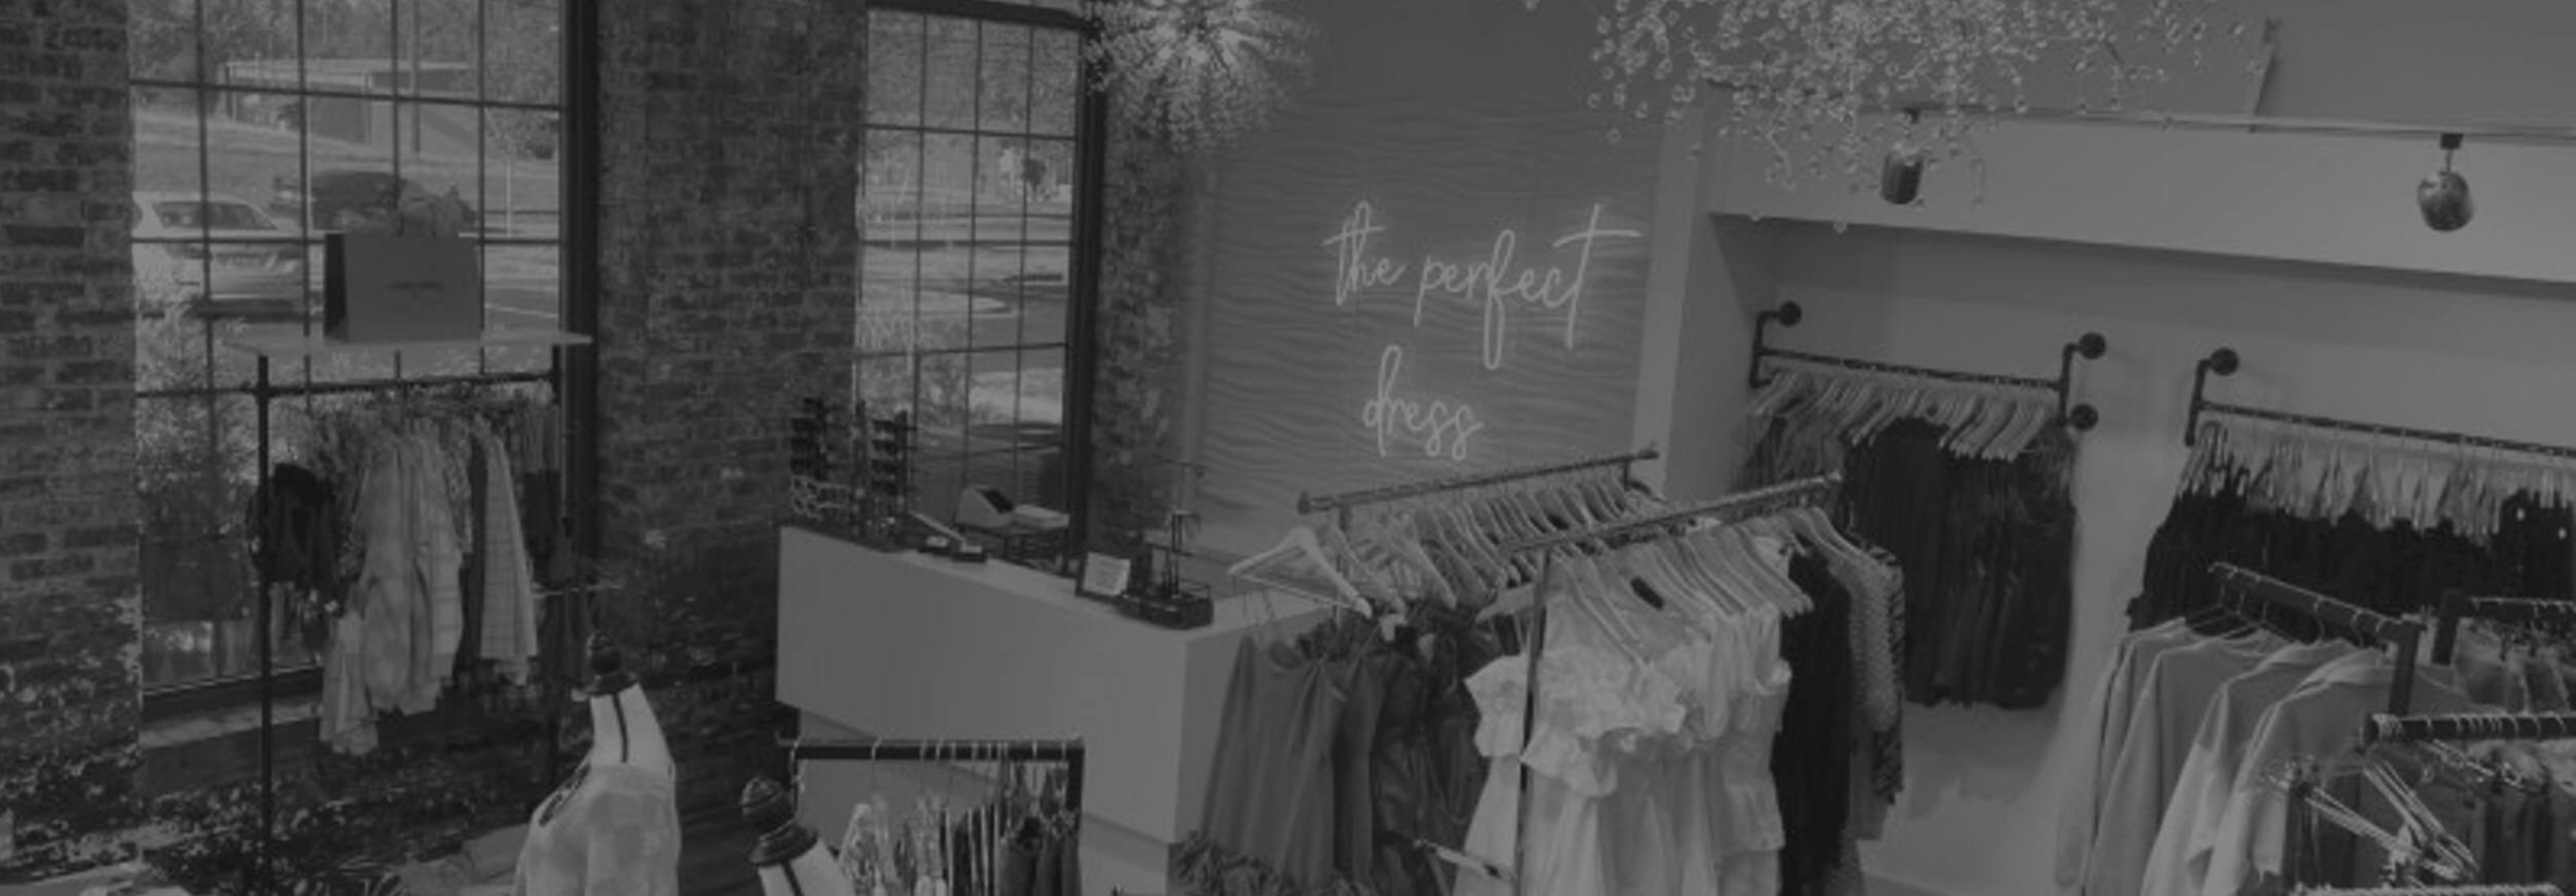 The Perfect Dress NC store